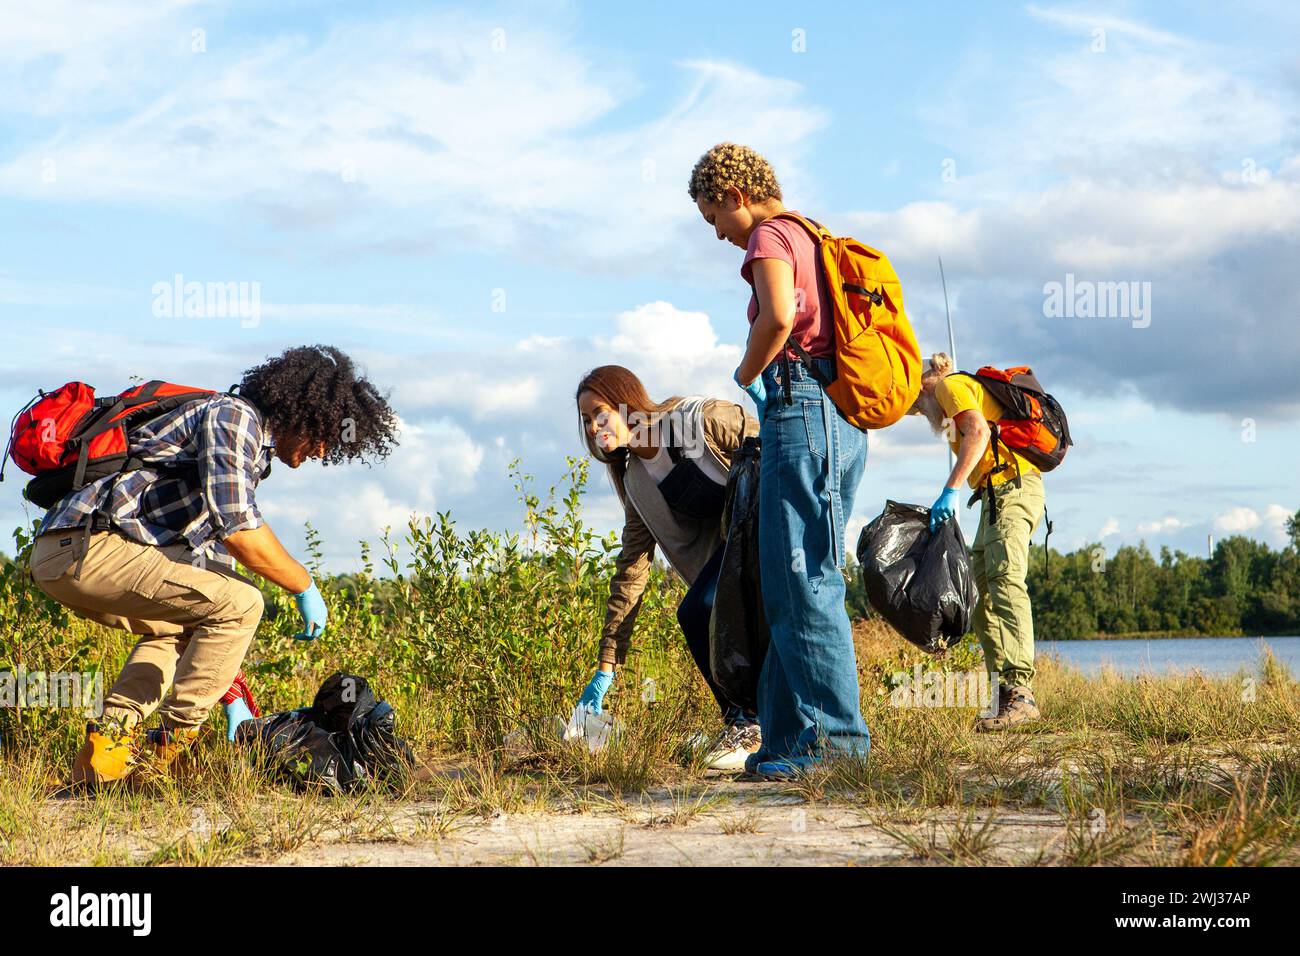 Dedication to the Environment: Group Cleanup Action Stock Photo